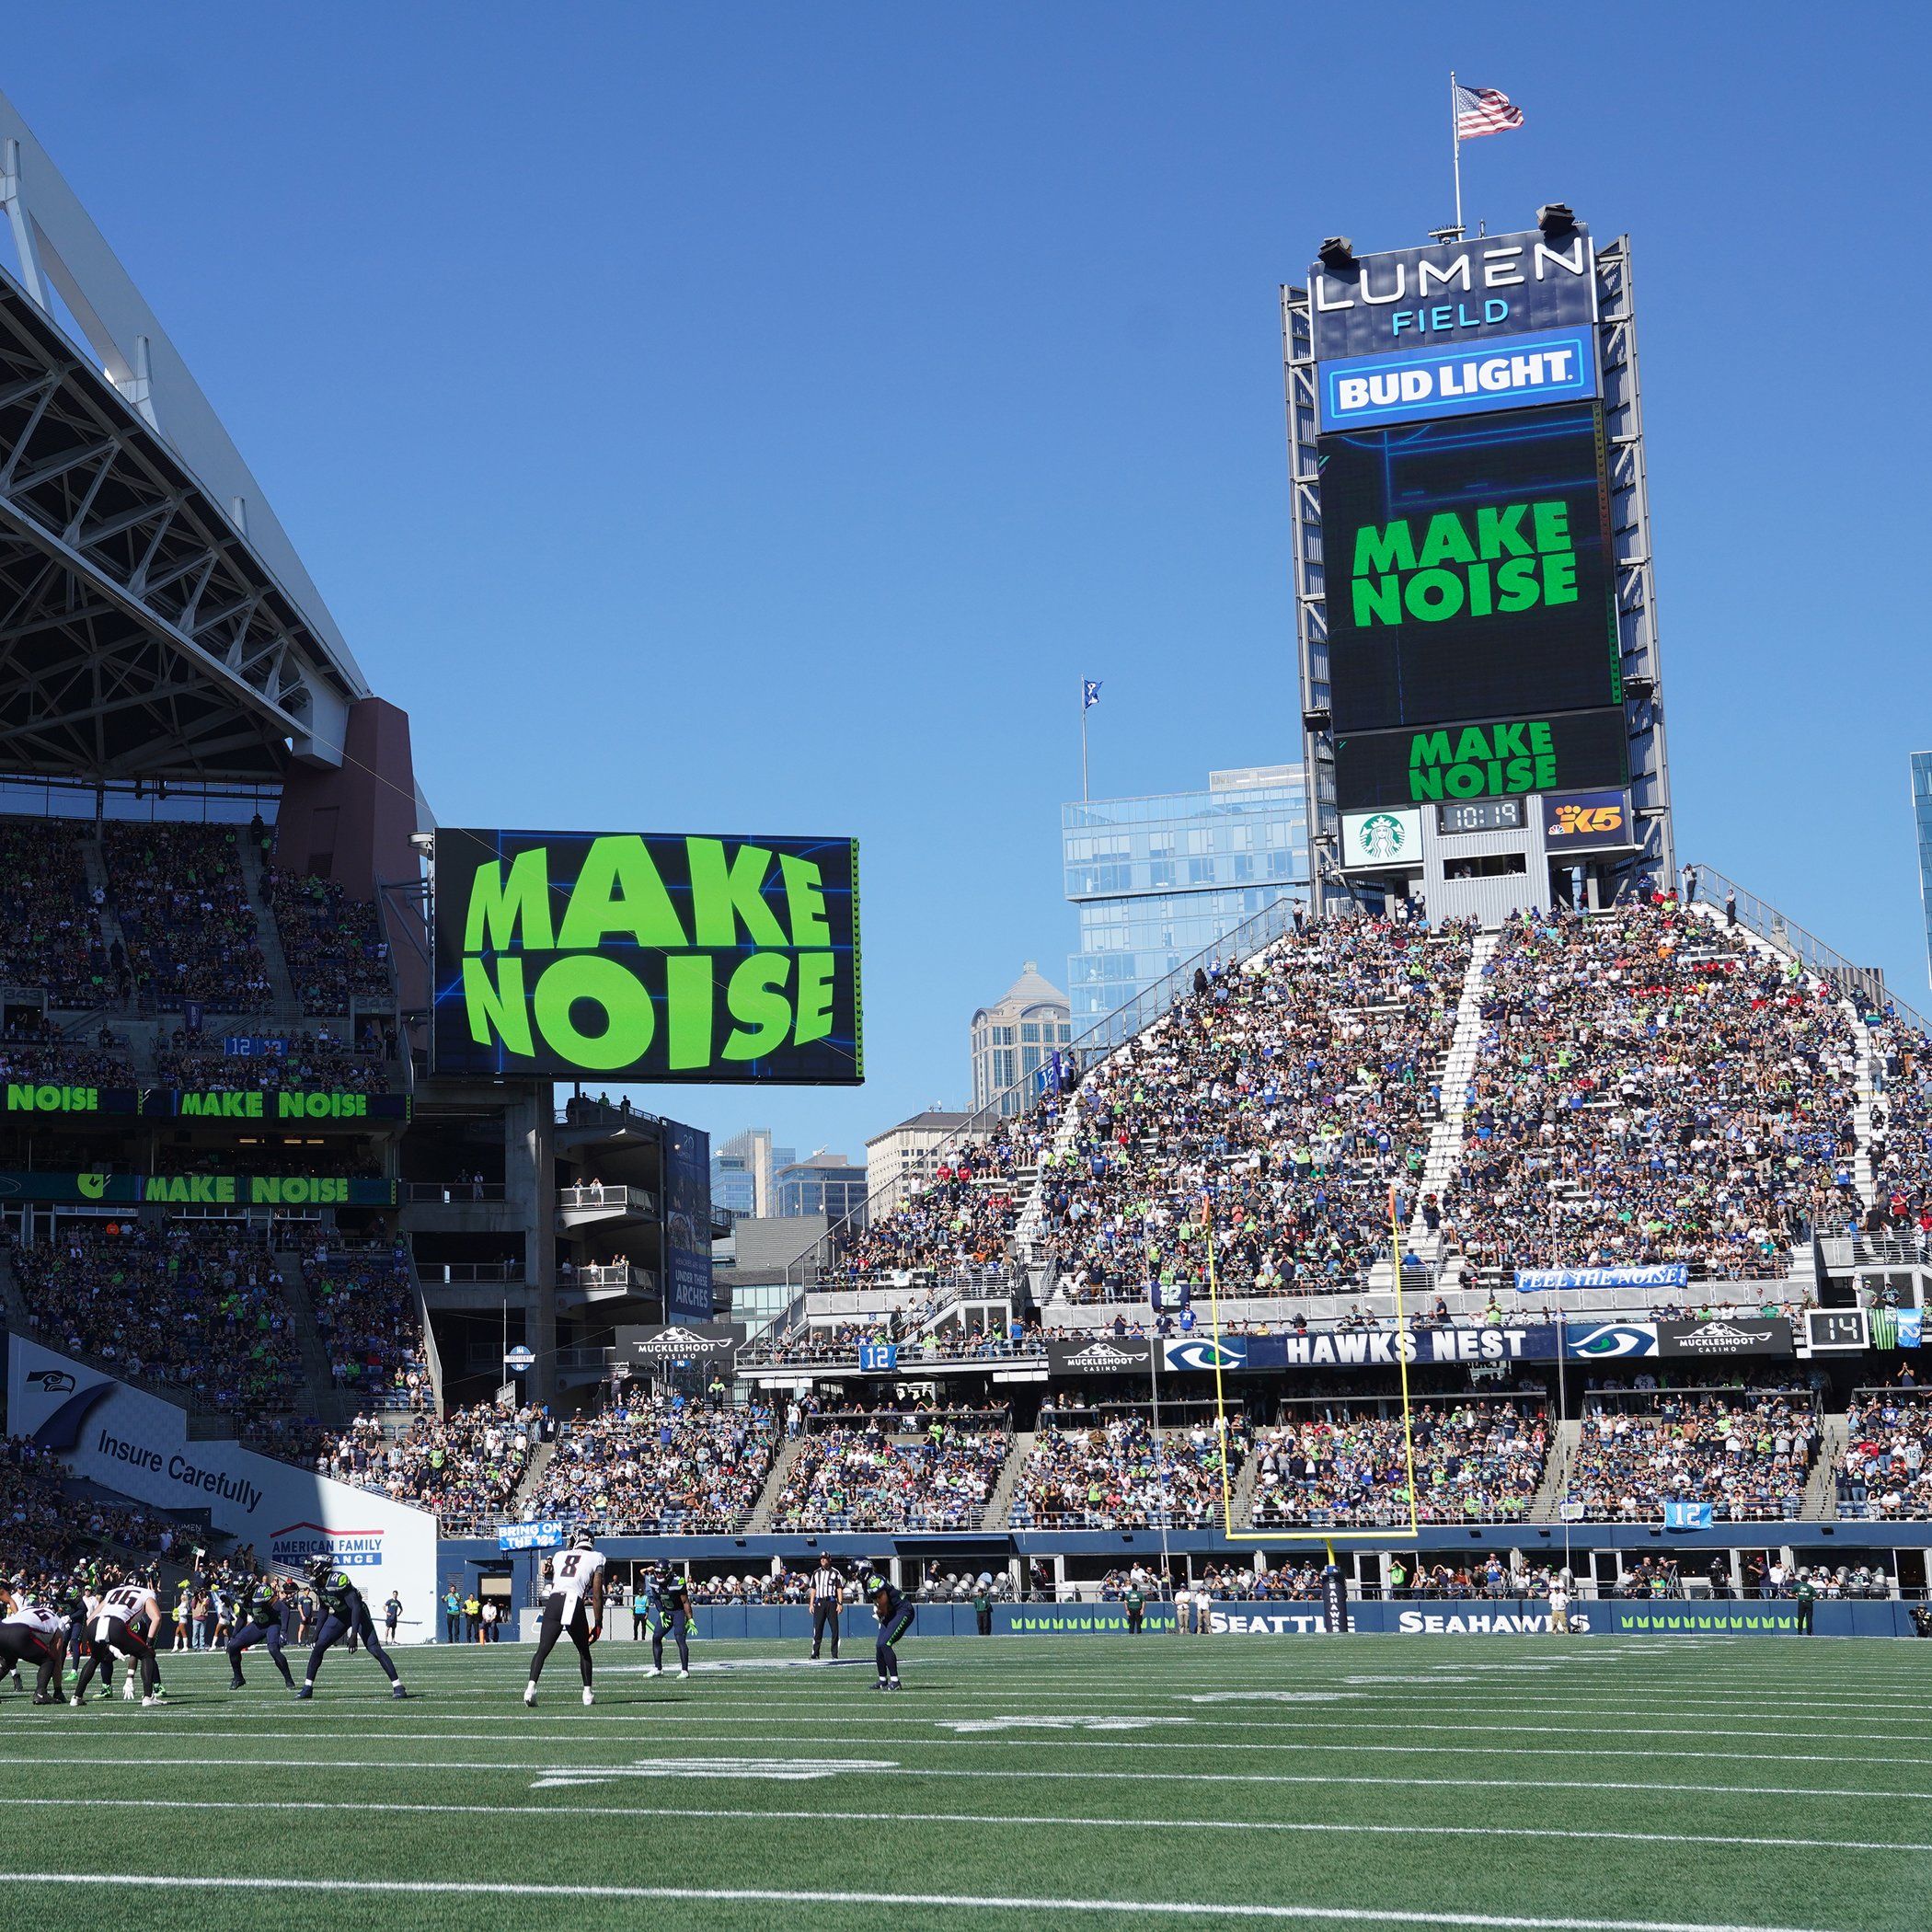 Seattle Seahawks vs Atlanta Falcons game halted after unlicensed drone reported at Lumen Field